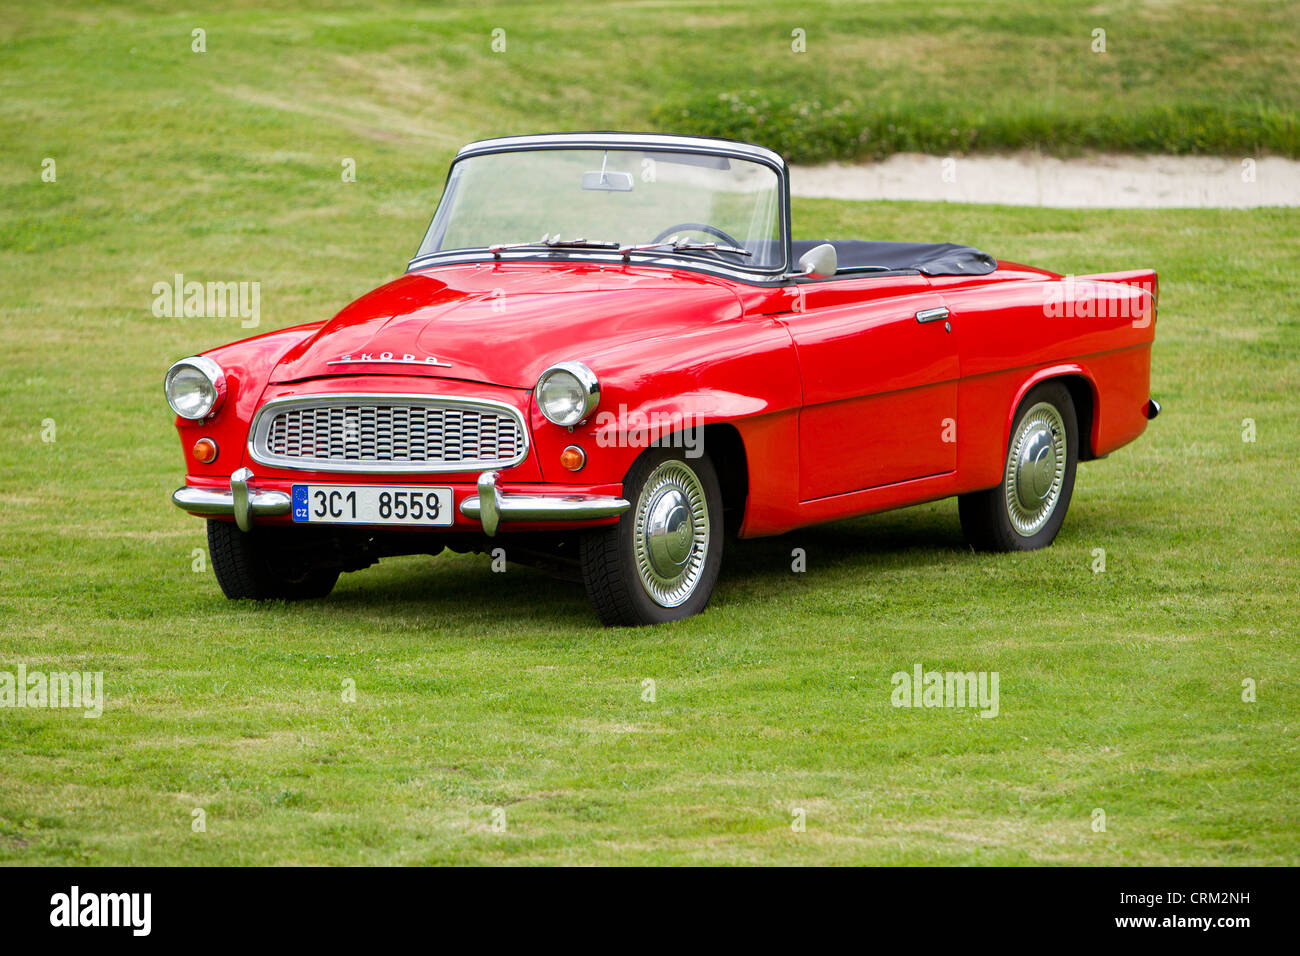 Skoda Felicia High Resolution Stock Photography and Images - Alamy